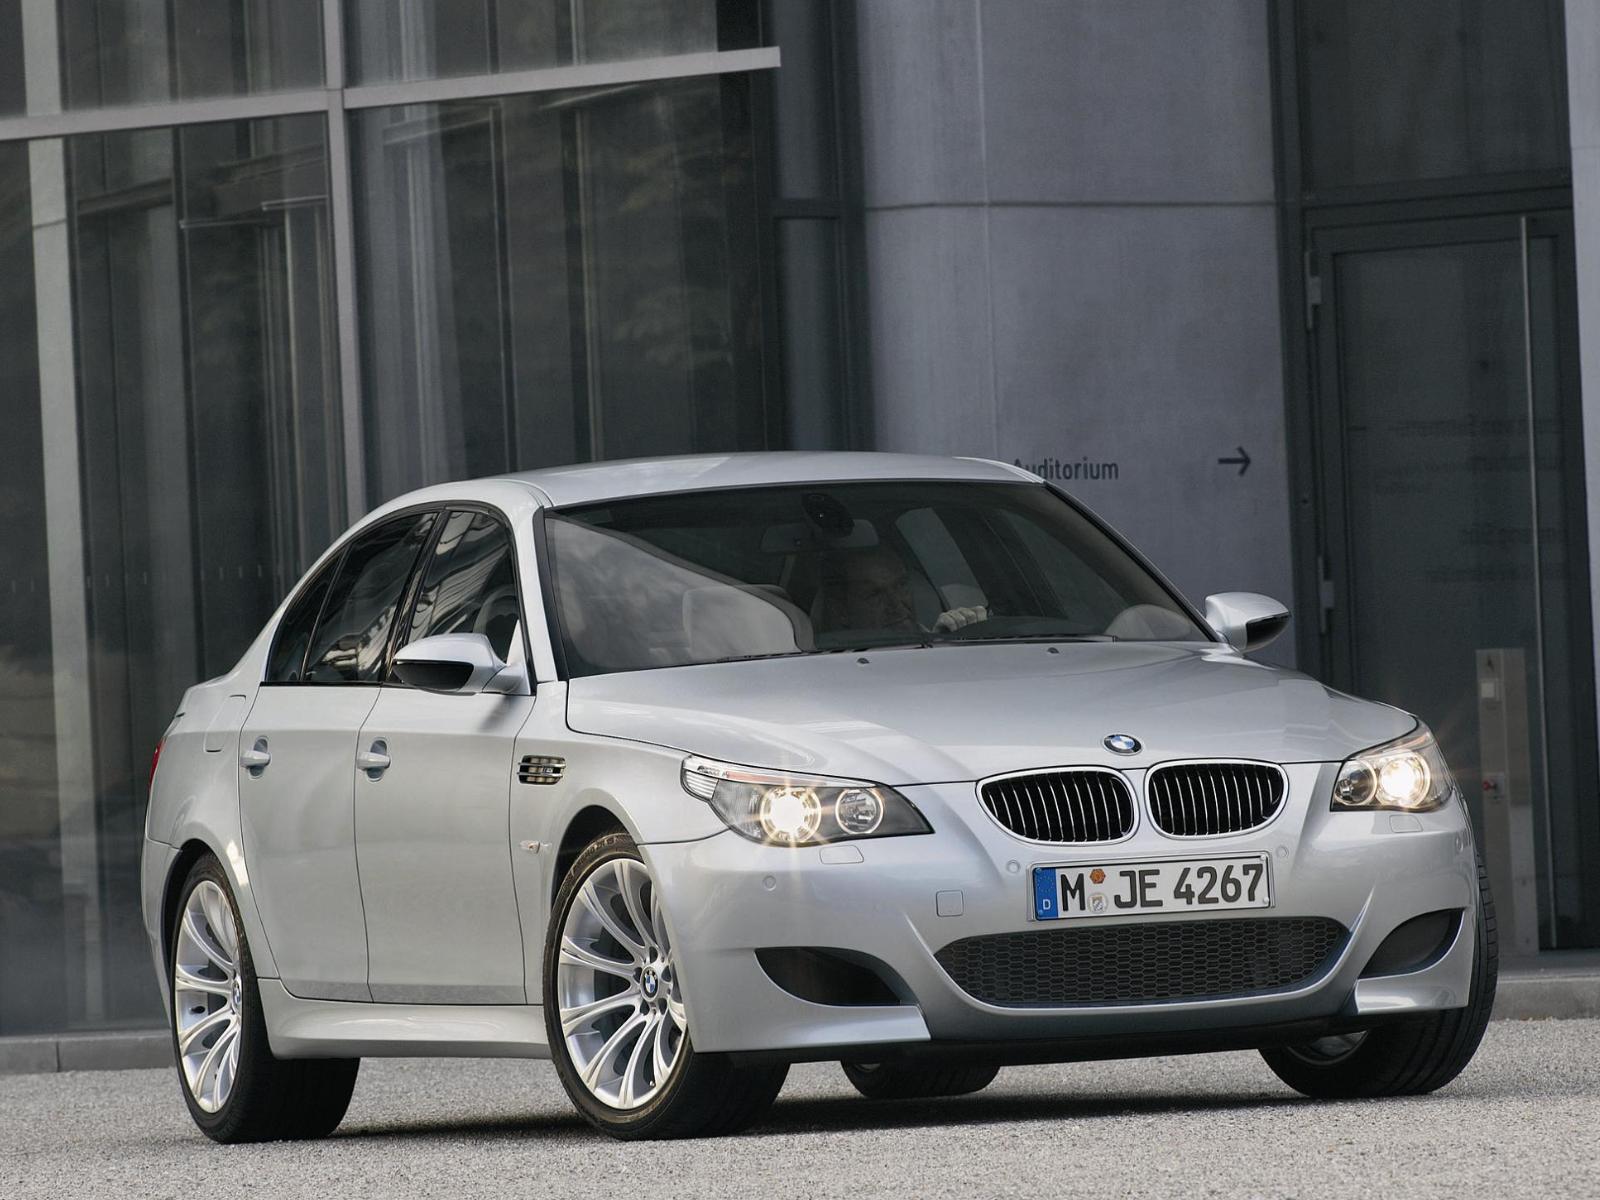 Images of Bmw E60 | 1600x1200